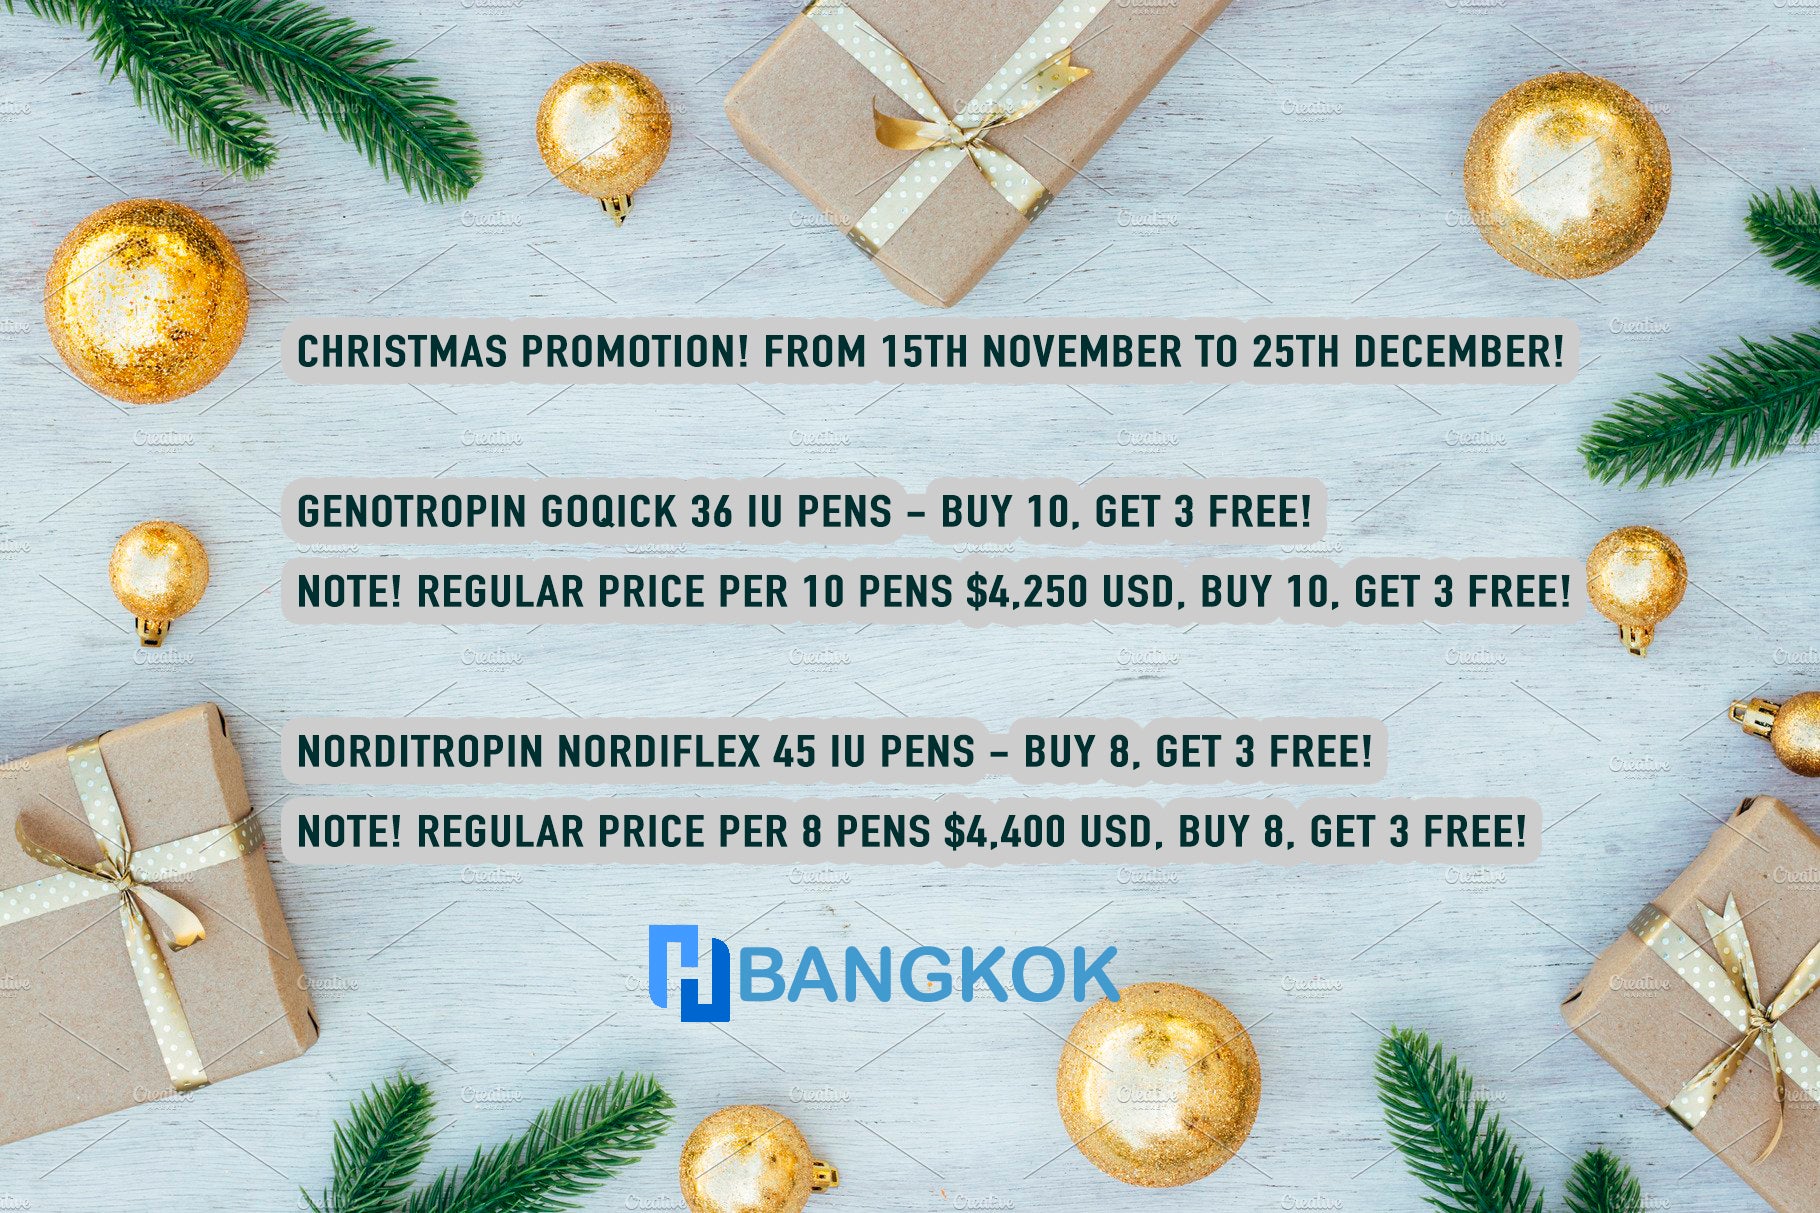 https://hghbangkok.com/blogs/news-of-hgh-thailand-pharmacy/christmas-promotion-🎄only-from-15th-november-to-25th-december